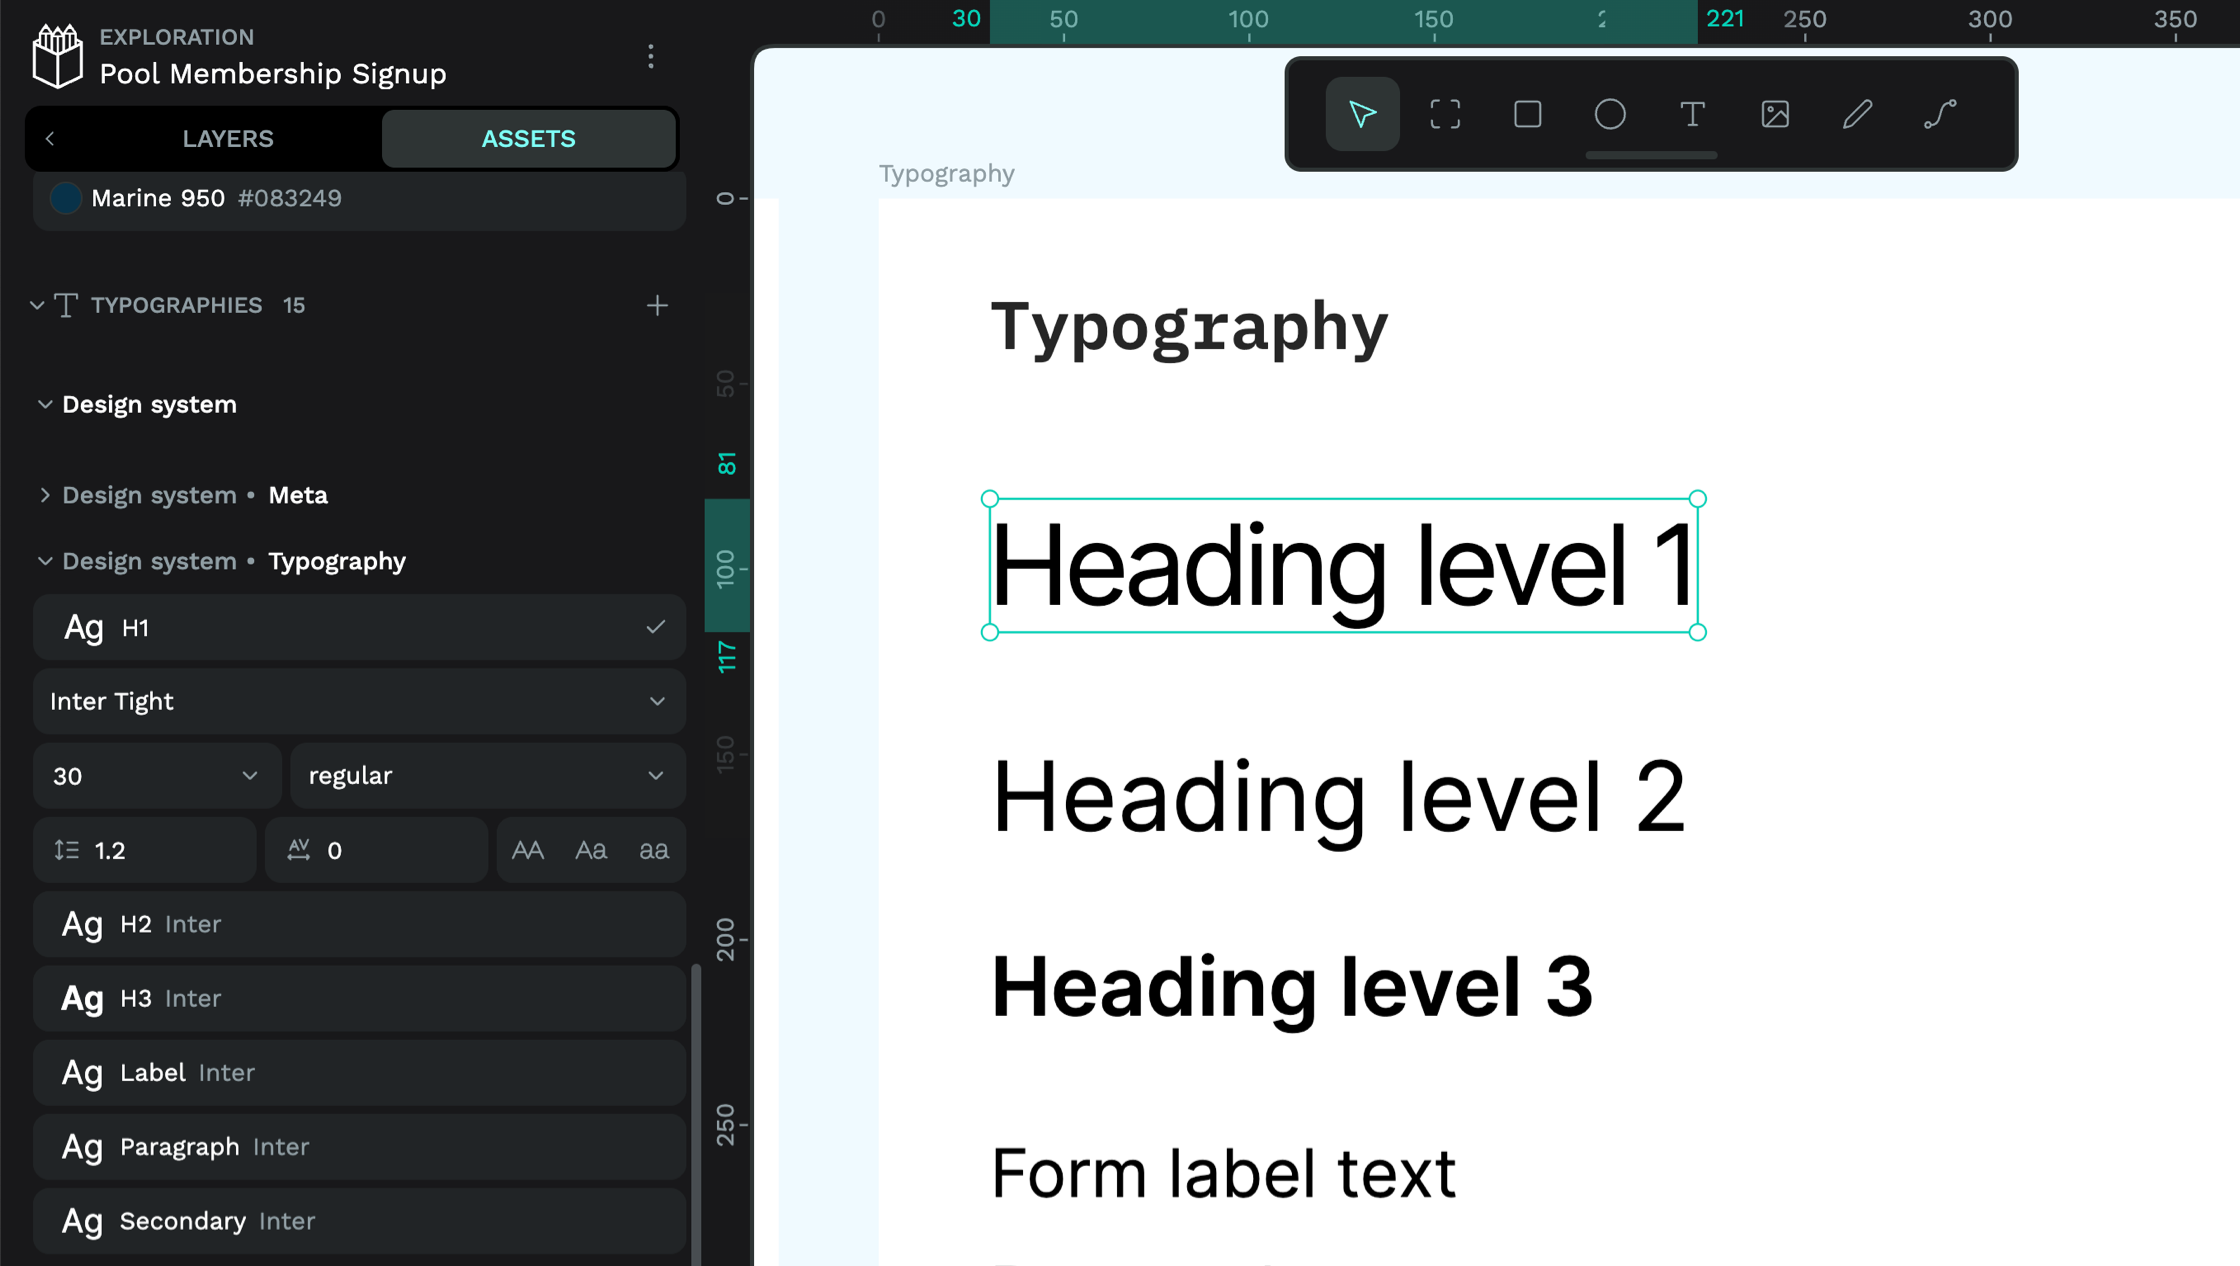 Heading level 1 text object selected and the H1 typography showing in the Assets panel.